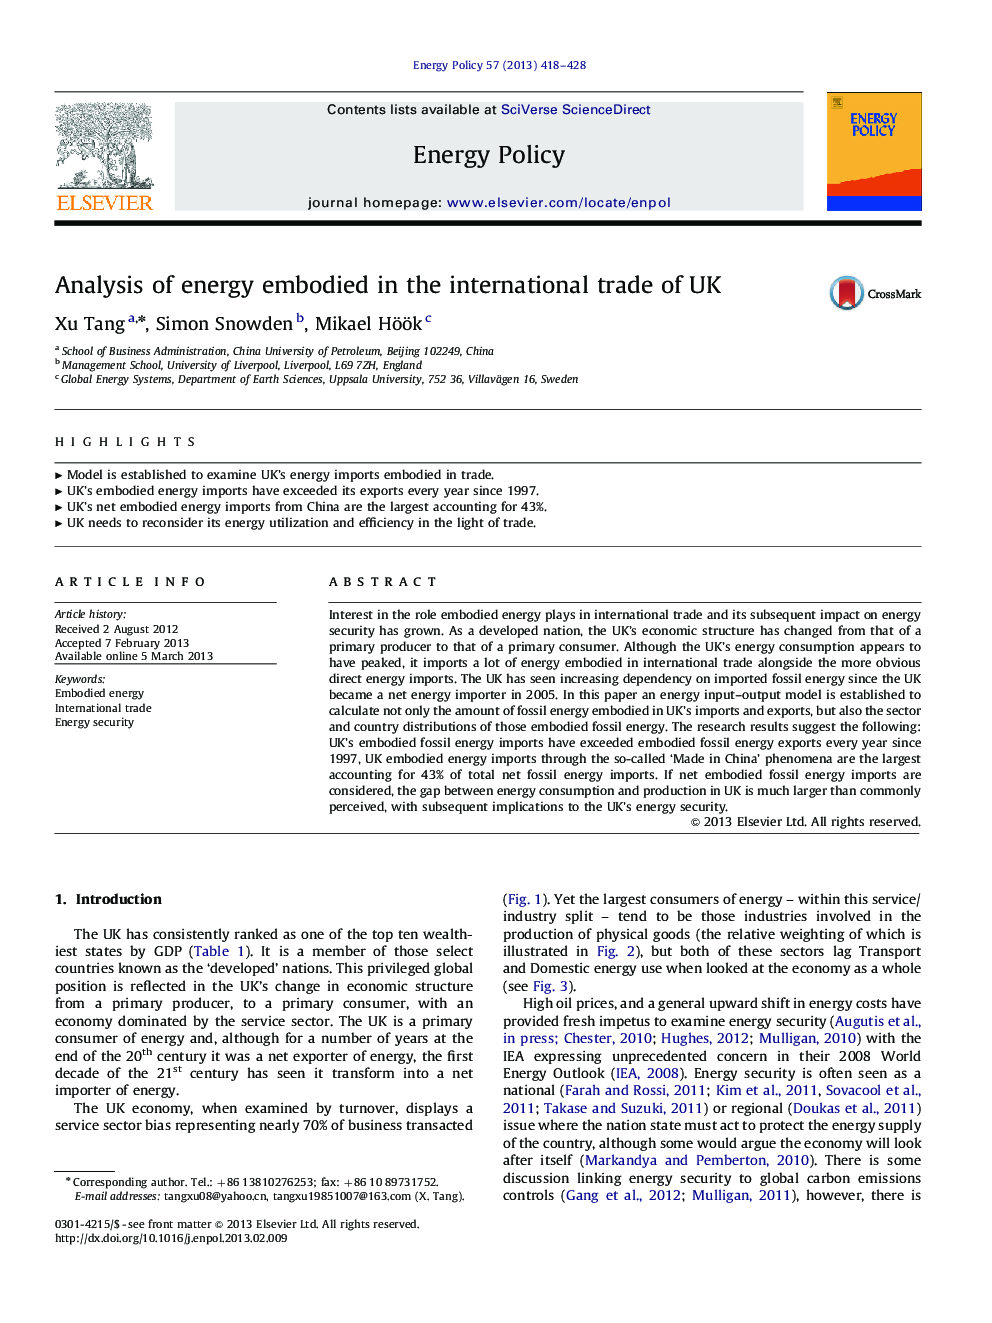 Analysis of energy embodied in the international trade of UK